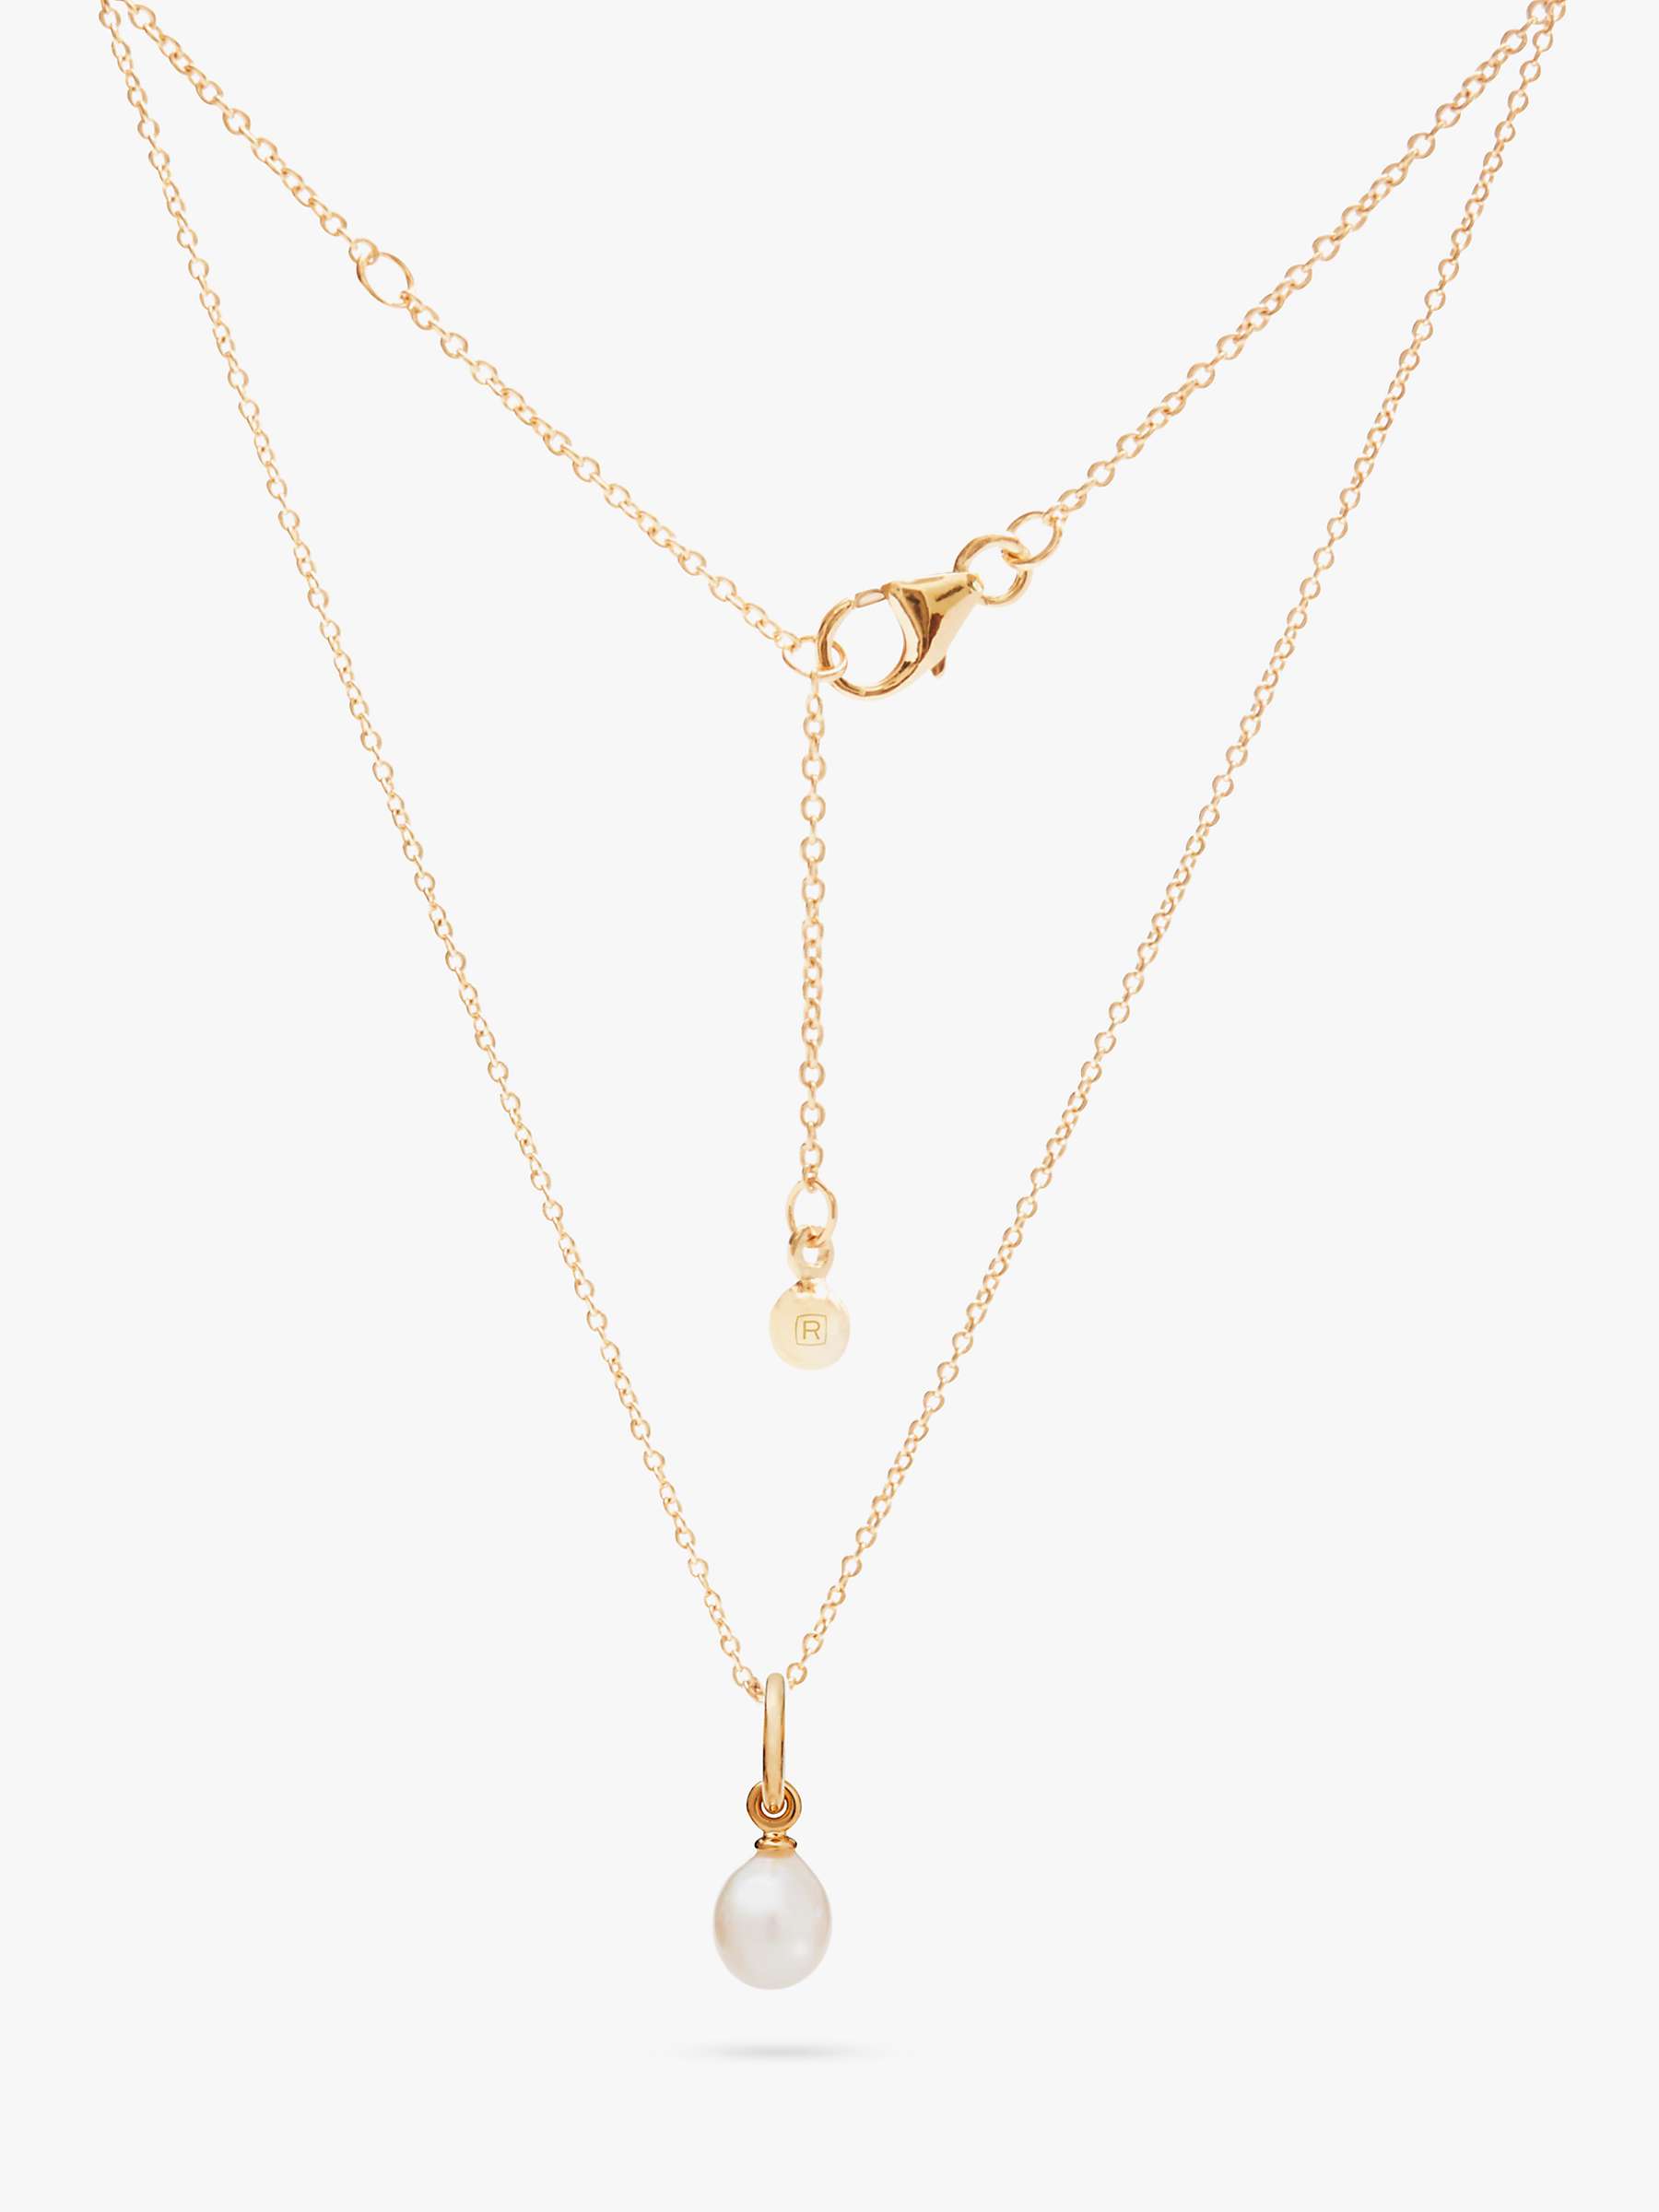 Buy Recognised Freedom Pearl Pendant Necklace Online at johnlewis.com